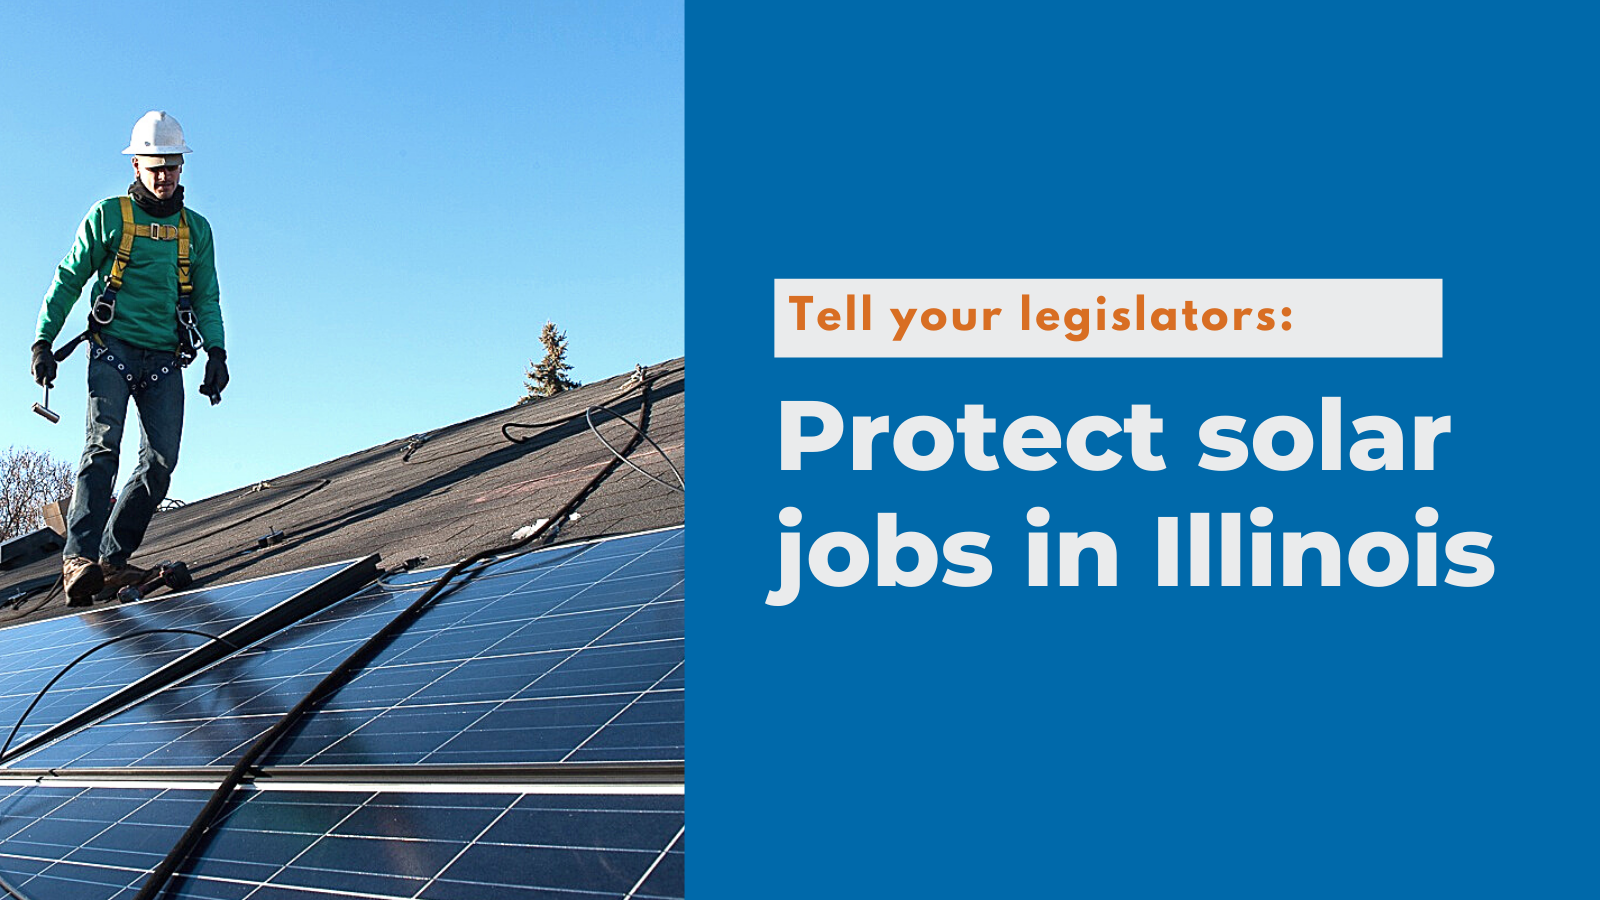 No more delays: Illinois legislators must pass climate and energy bill to protect solar jobs and frontline communities